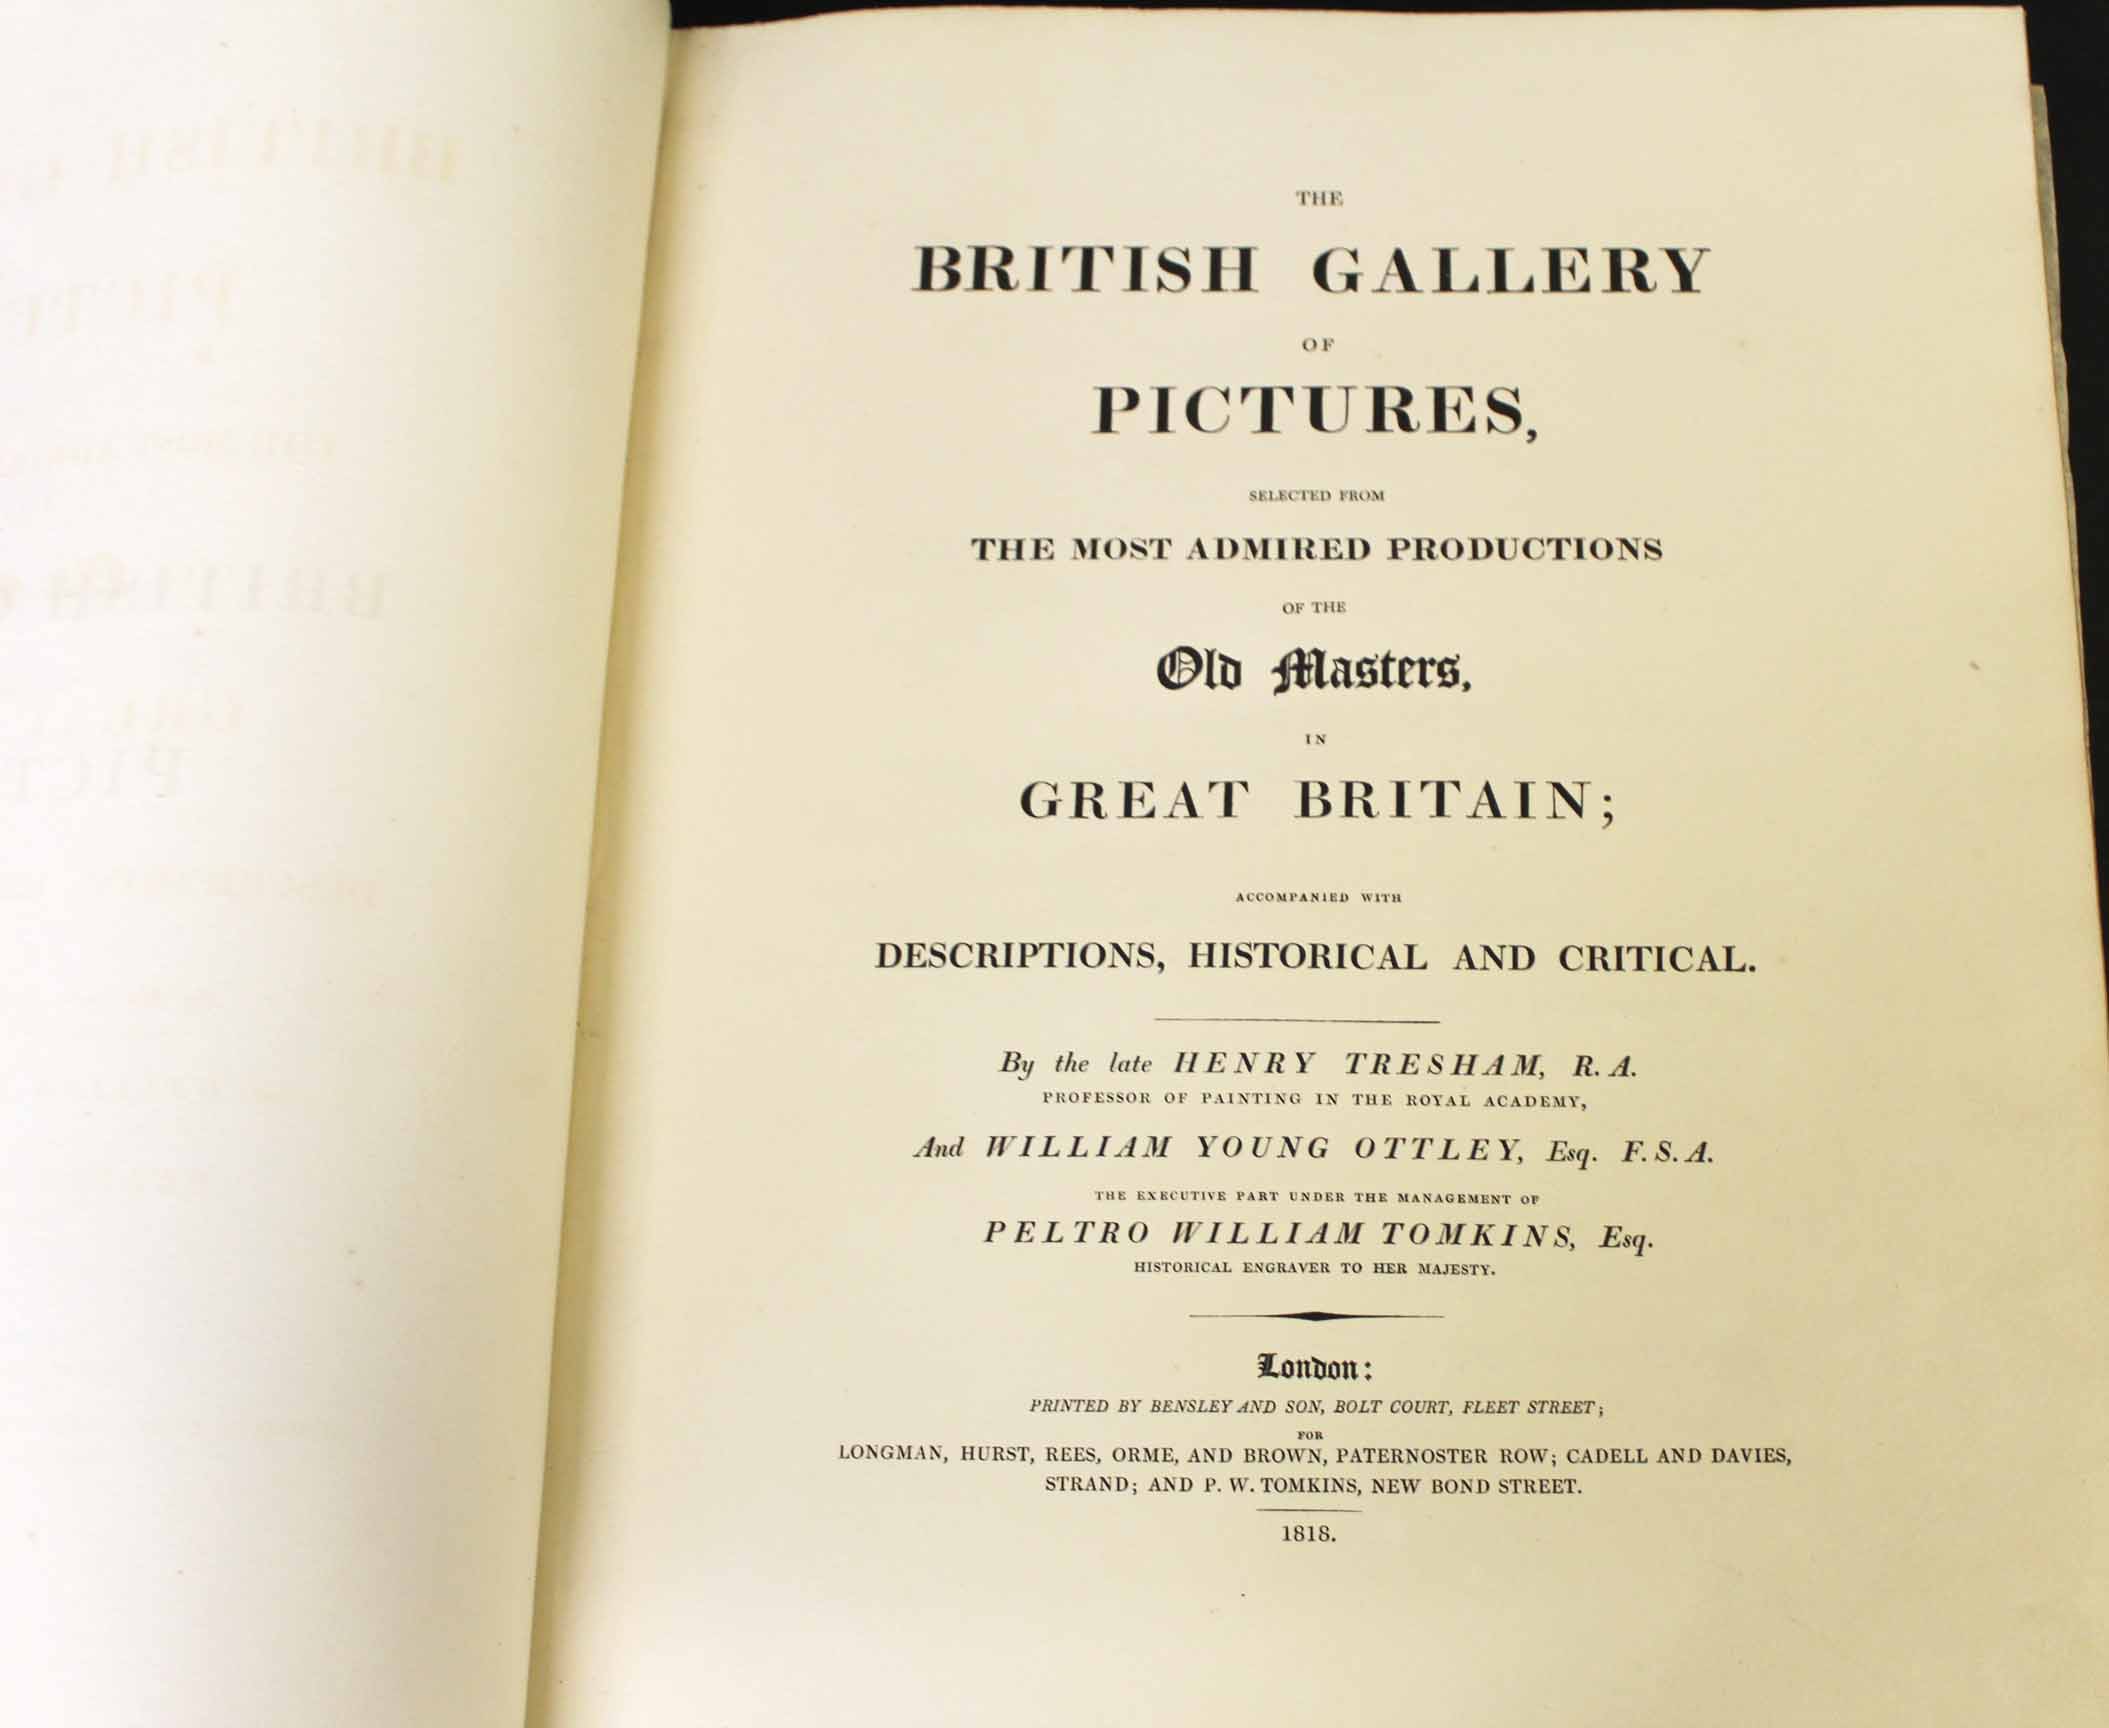 HENRY TRESHAM & WILLIAM YOUNG OTTLEY: THE BRITISH GALLERY OF PICTURES SELECTED FROM THE MOST ADMIRED